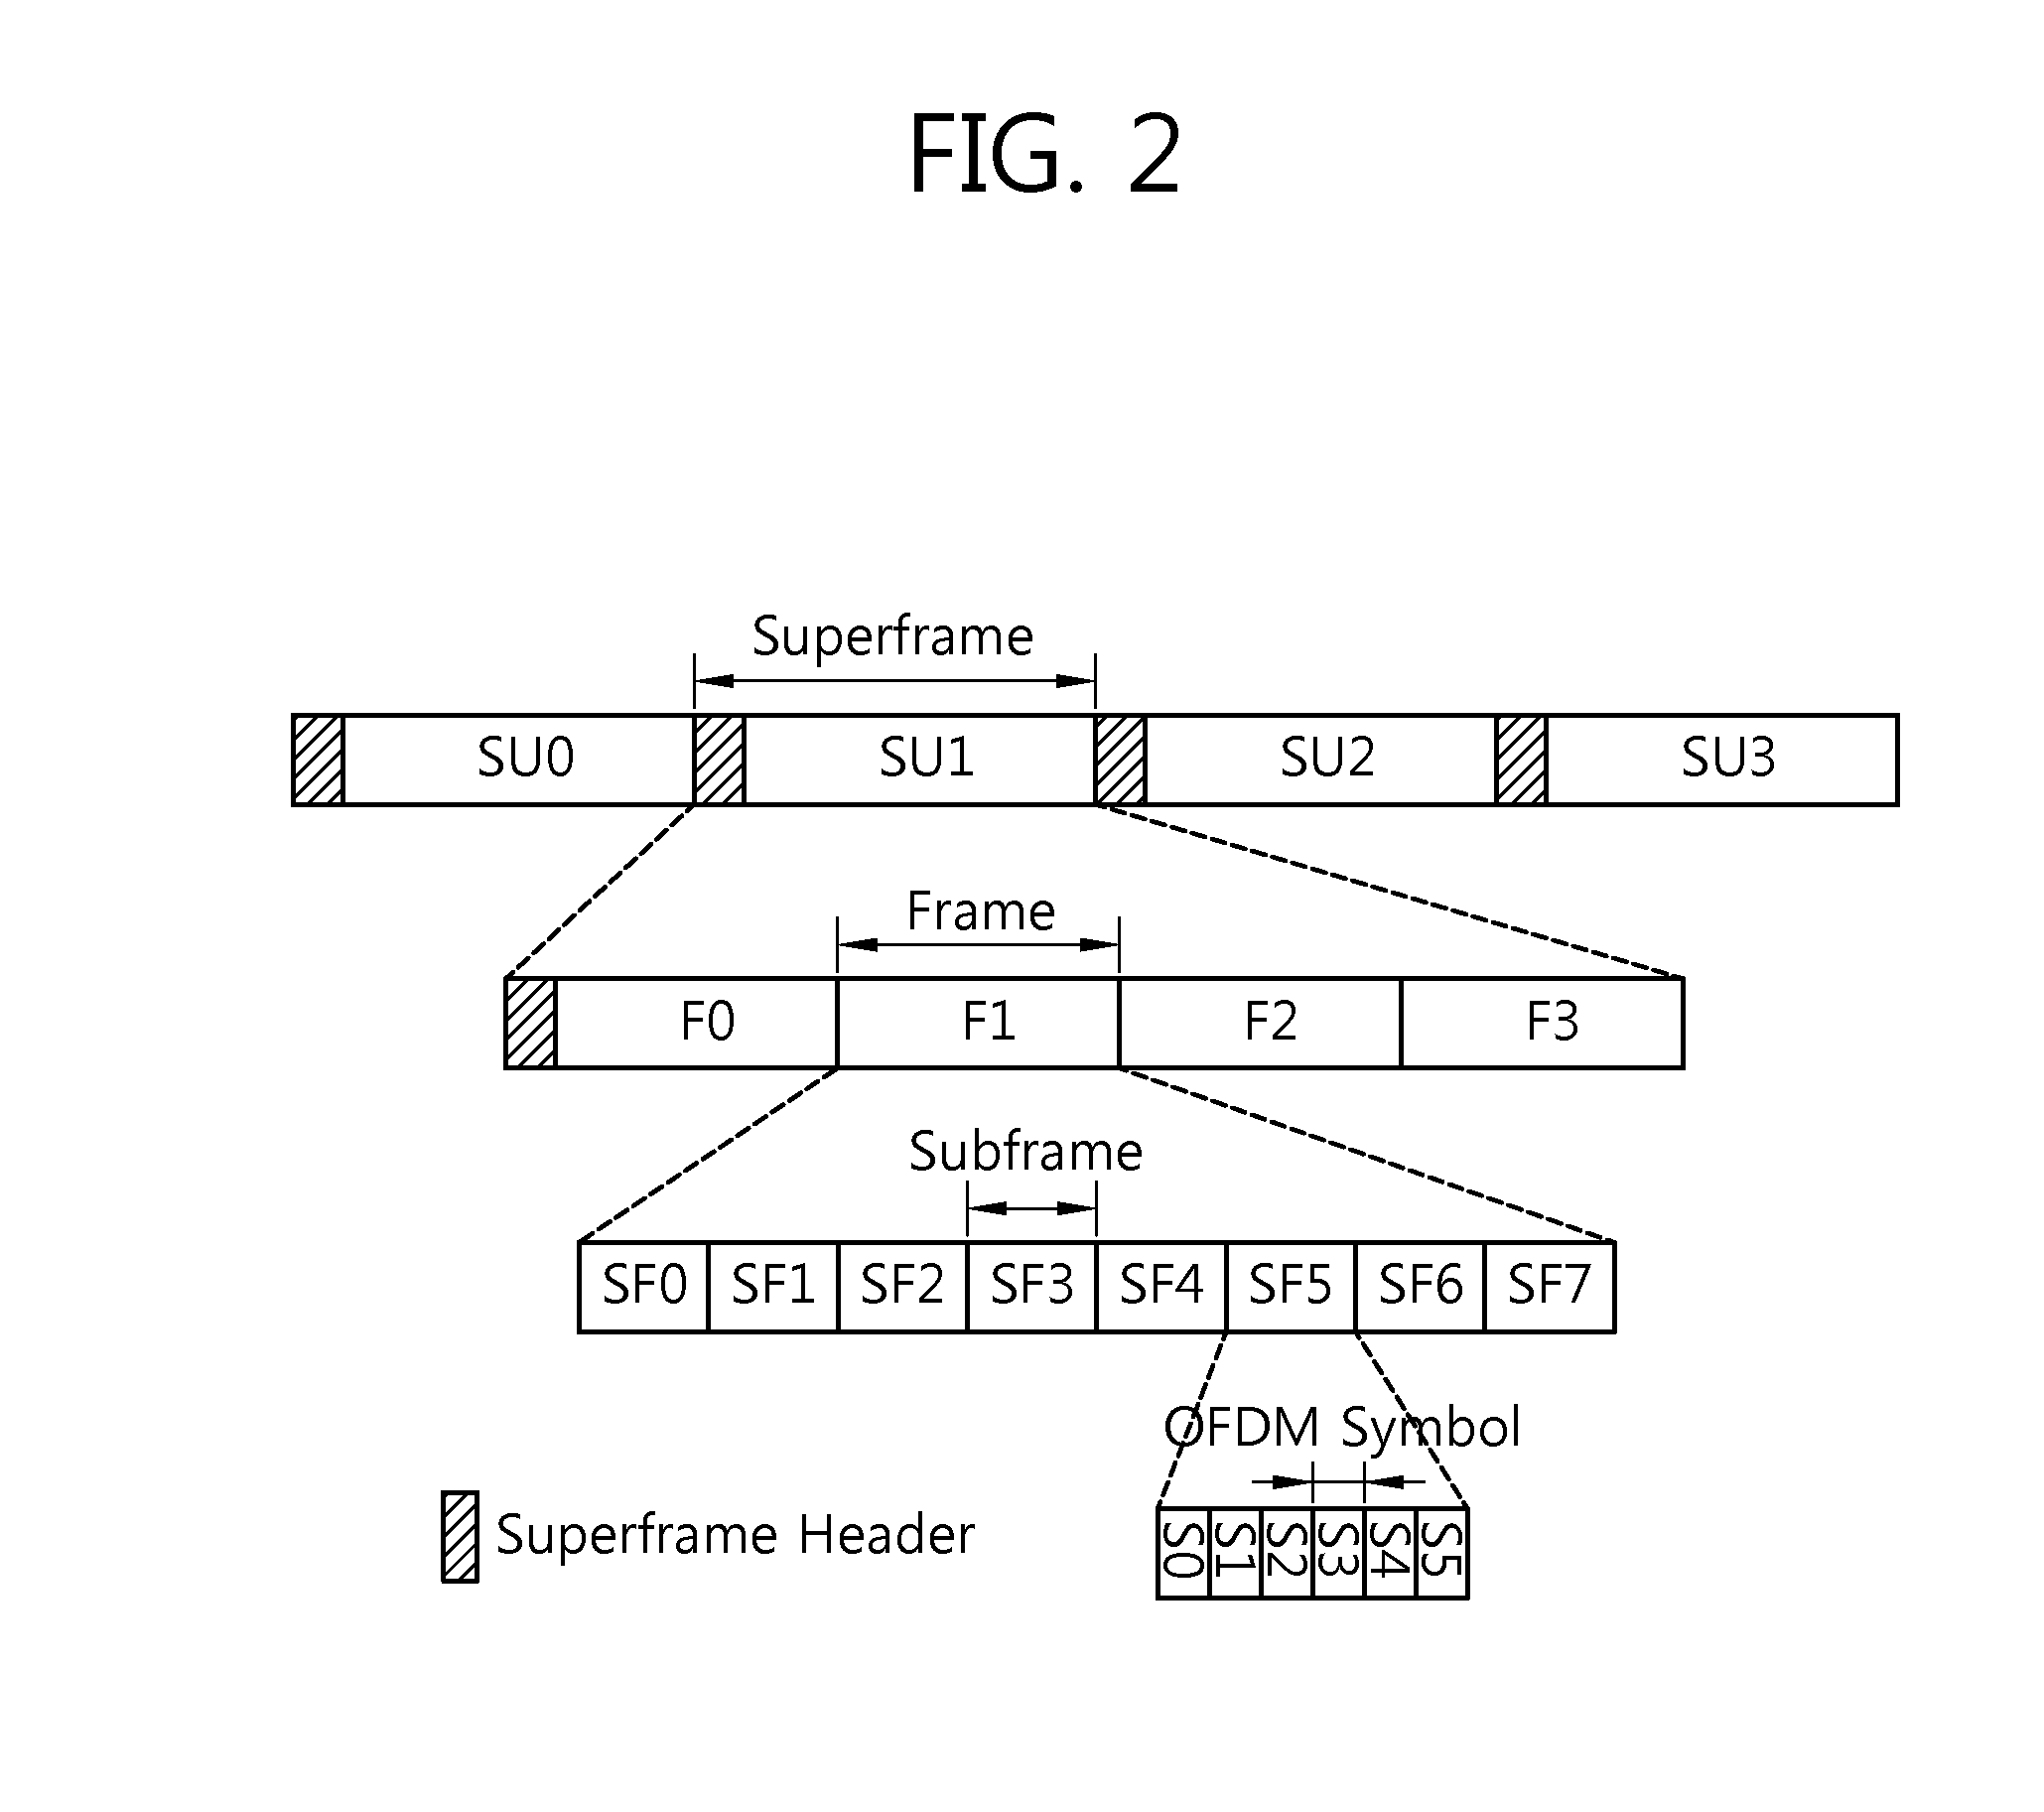 Method and apparatus for controlling uplink power in a wireless communication system